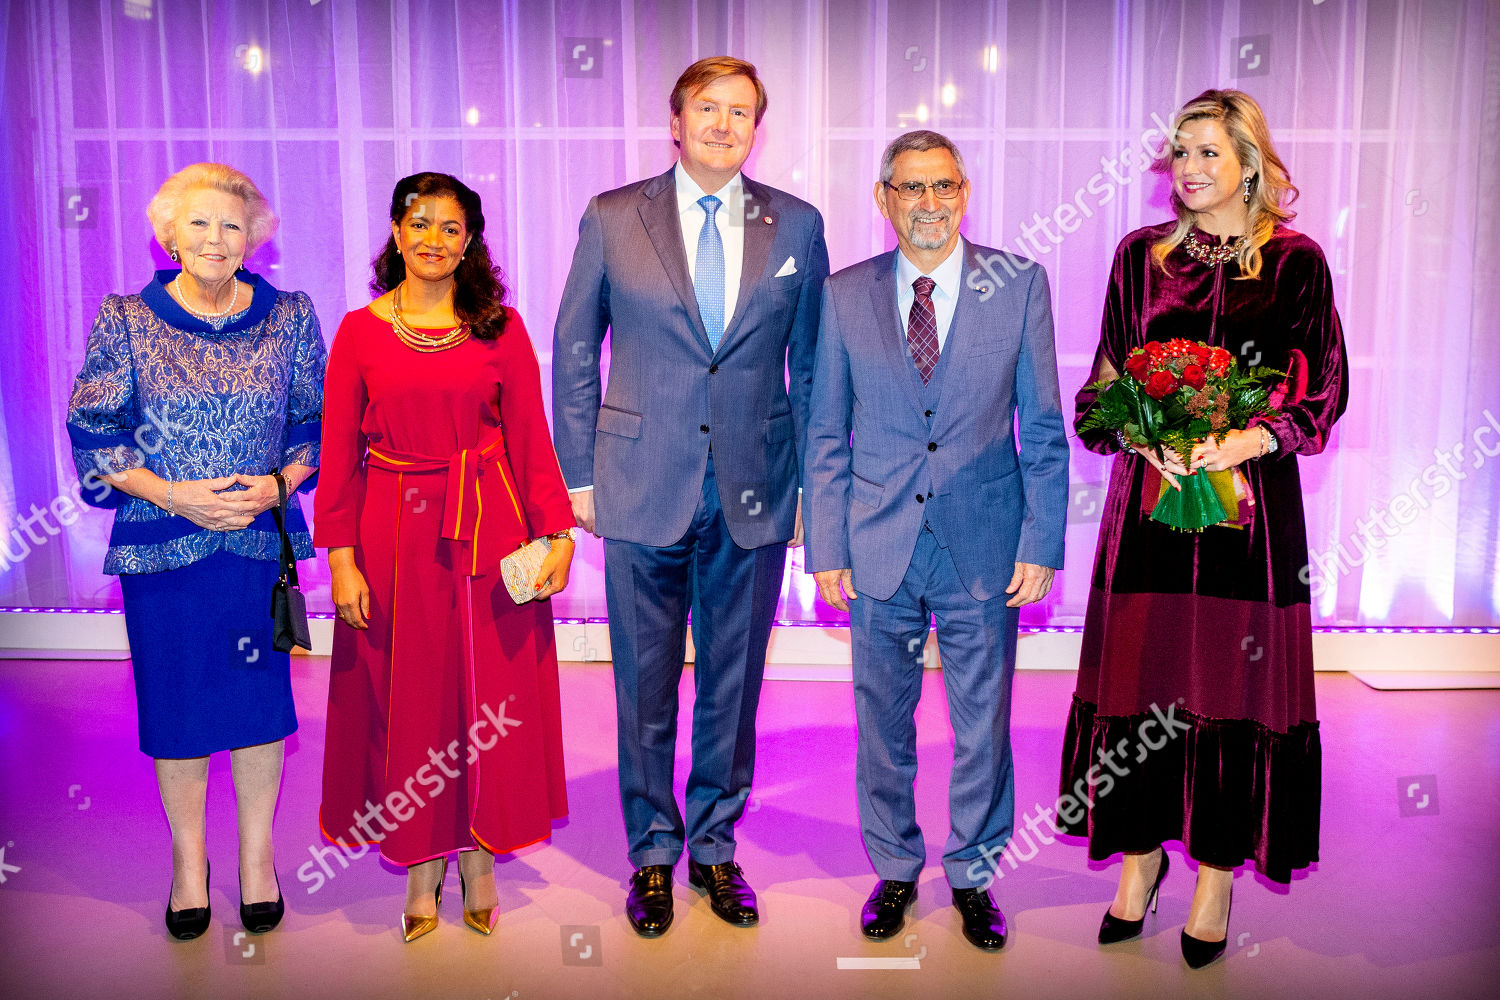 president-of-cape-verde-jorge-carlos-fonseca-visit-to-the-netherlands-shutterstock-editorial-10030144bc.jpg